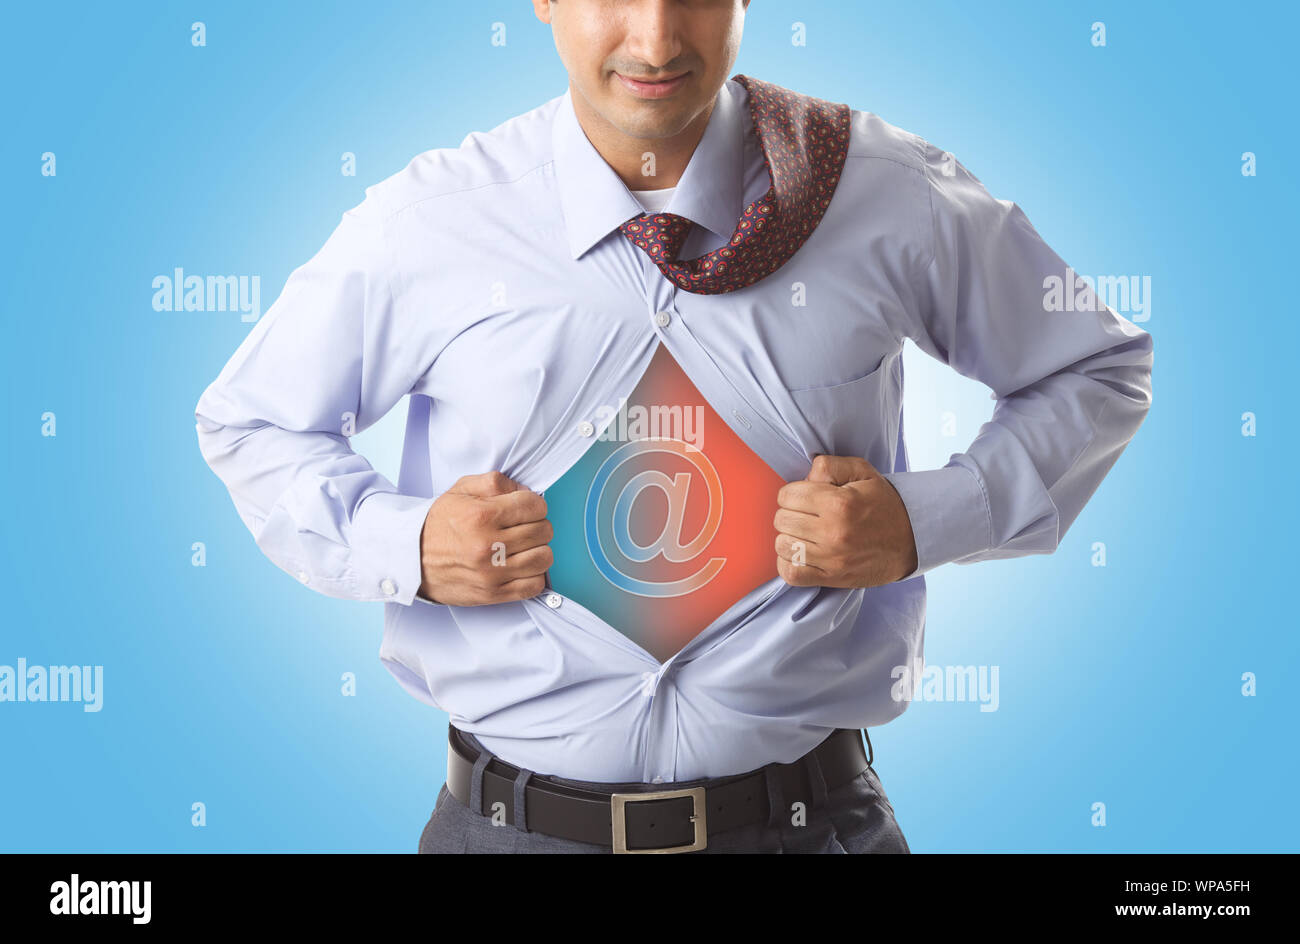 Super businessman tearing up his shirt to reveal at symbol on chest Stock Photo